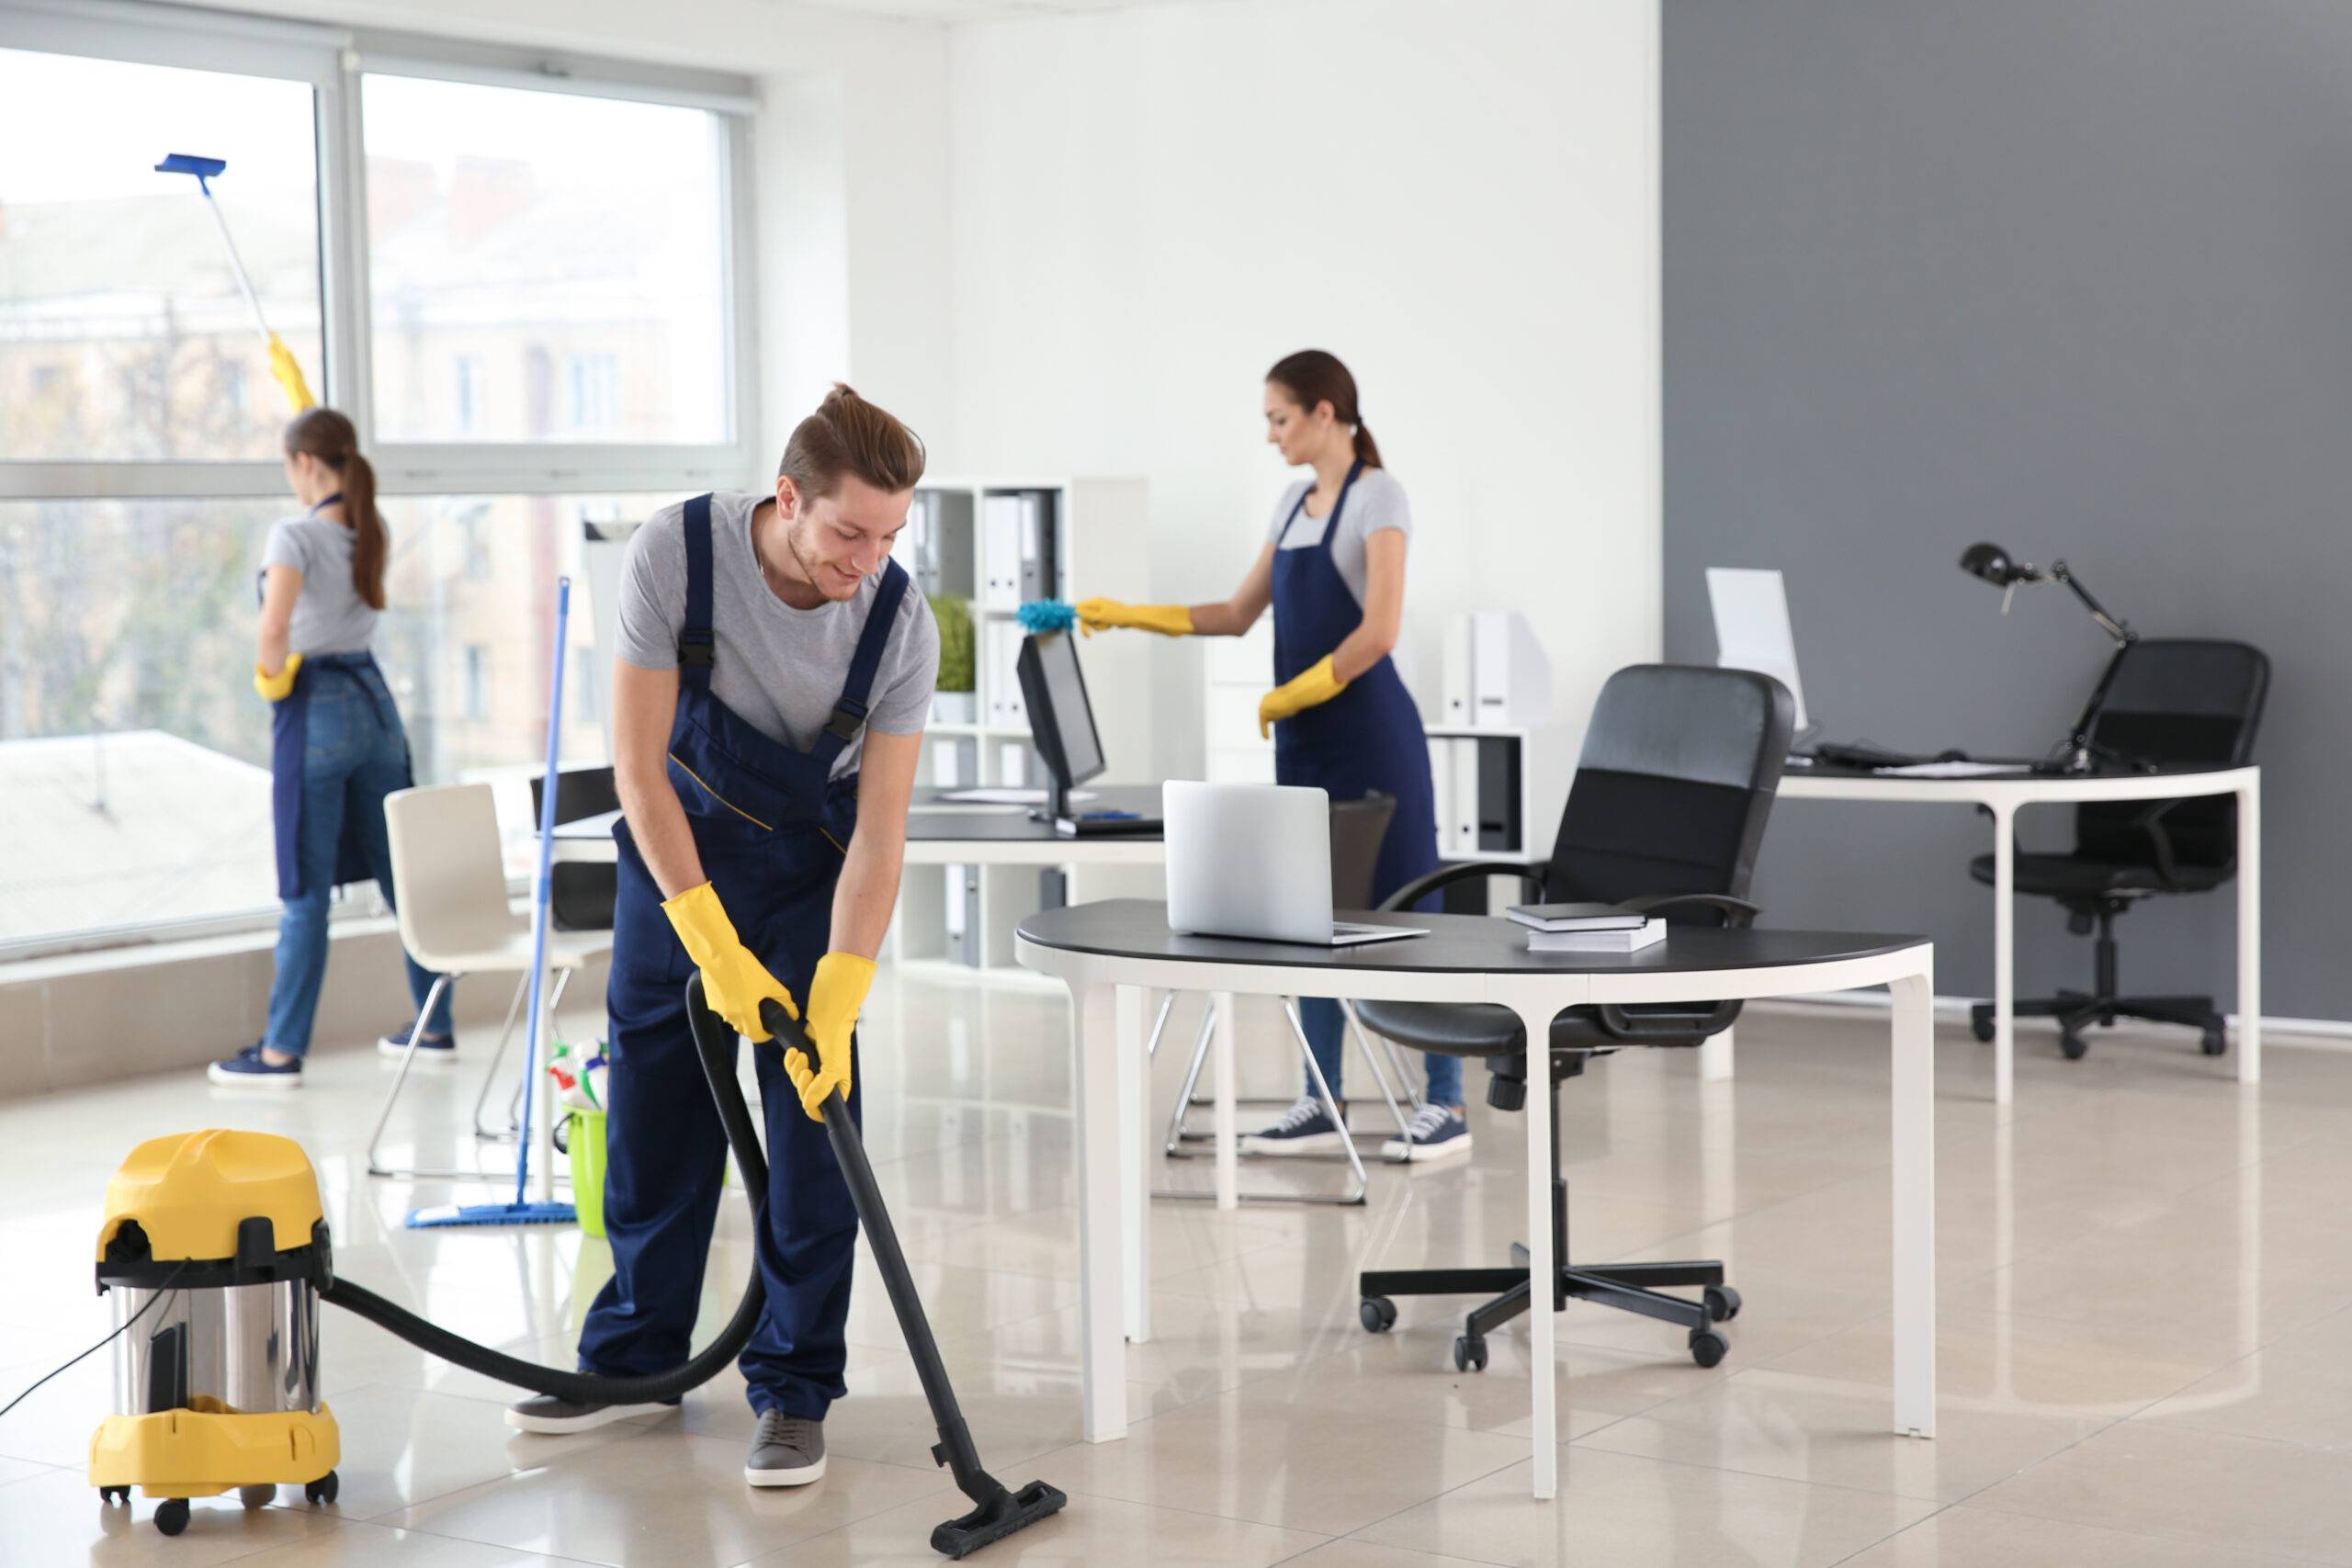 Janitorial Services Calgary
